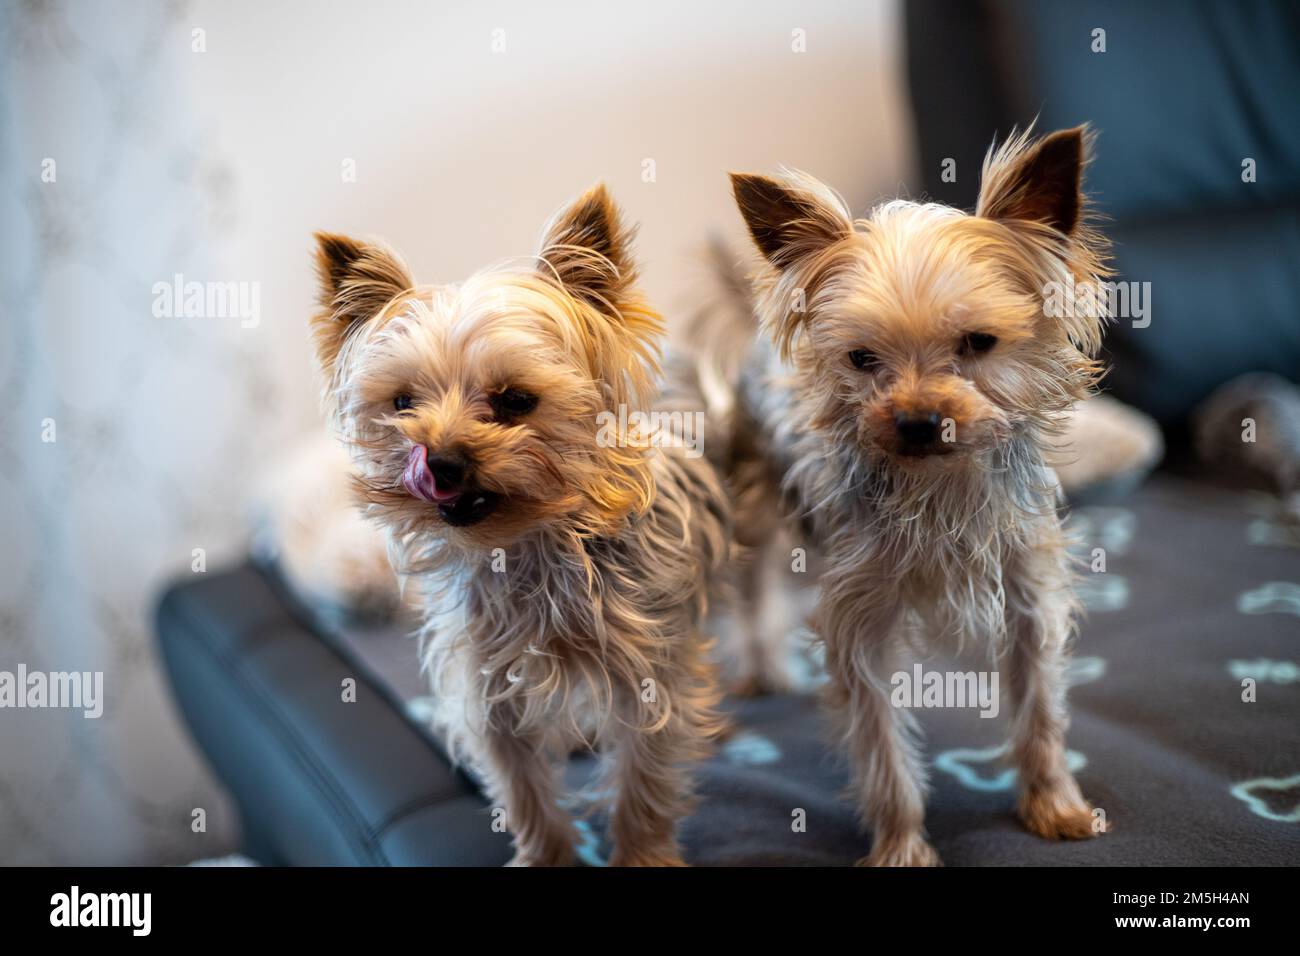 close-up of 2 Yorkshir terriers sitting together on a couch. High quality photo Stock Photo